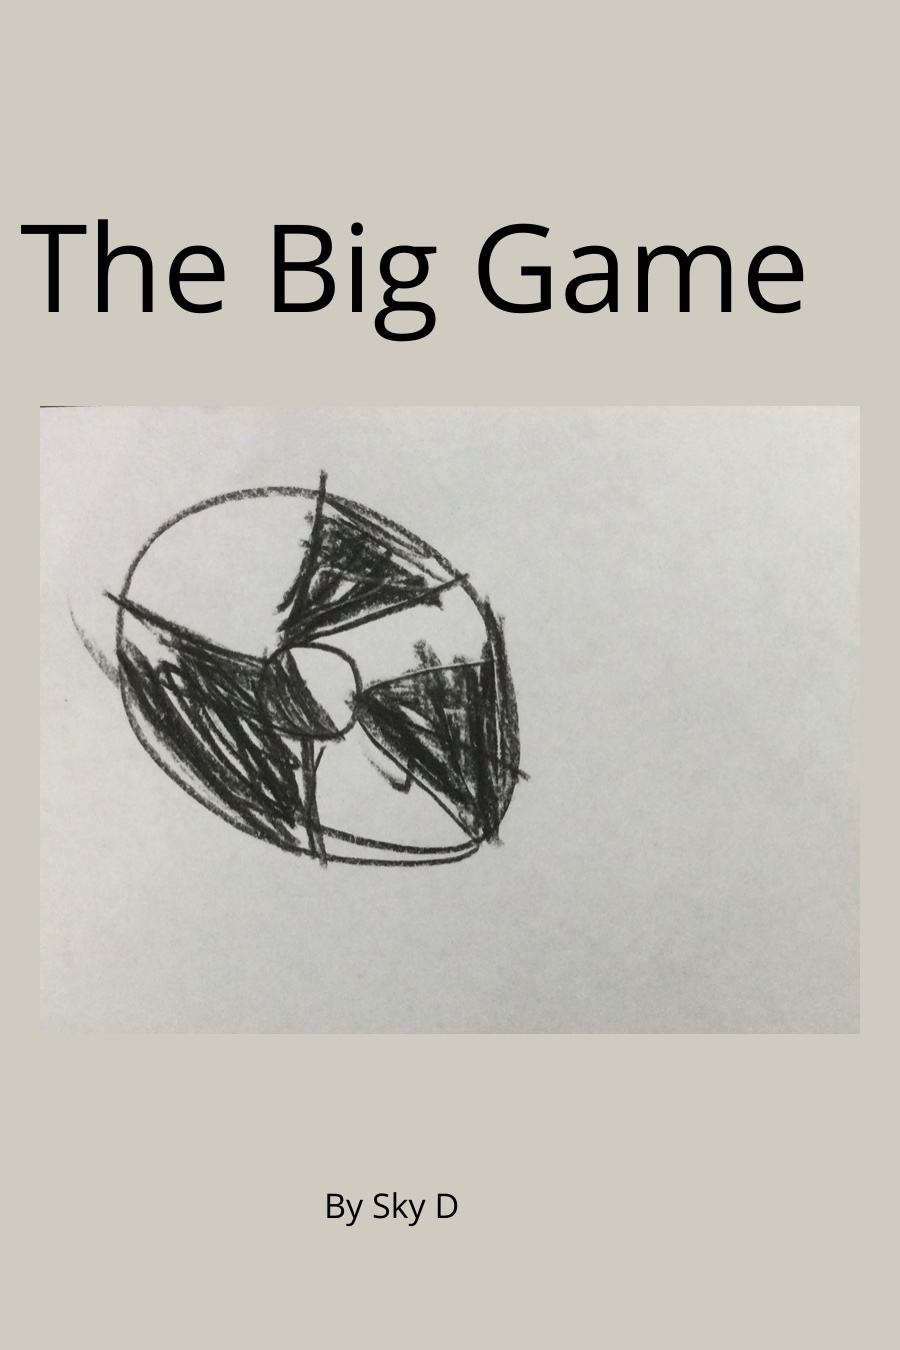 The Big Game by Sky D